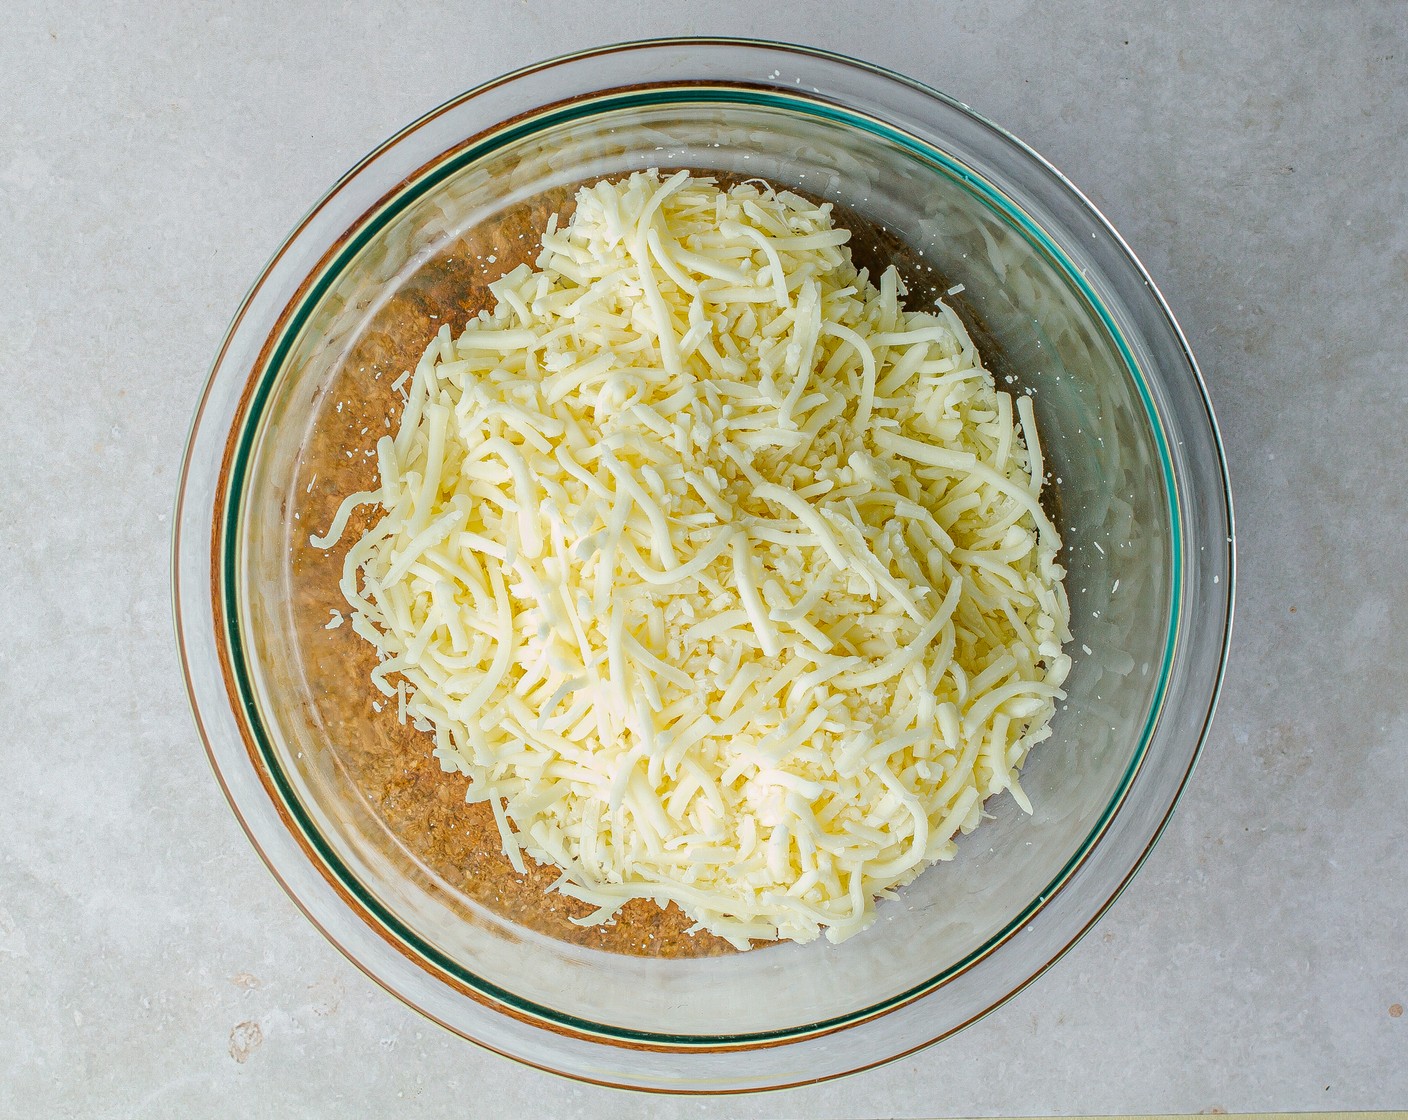 step 3 Reserve ¼ cup of the Yellow Onion (1) and Green Bell Pepper (1) to the side for topping. Add Shredded Mozzarella Cheese (2 cups) and Shredded Parmesan Cheese (1/2 cup) to a bowl and toss to combine. Set aside.